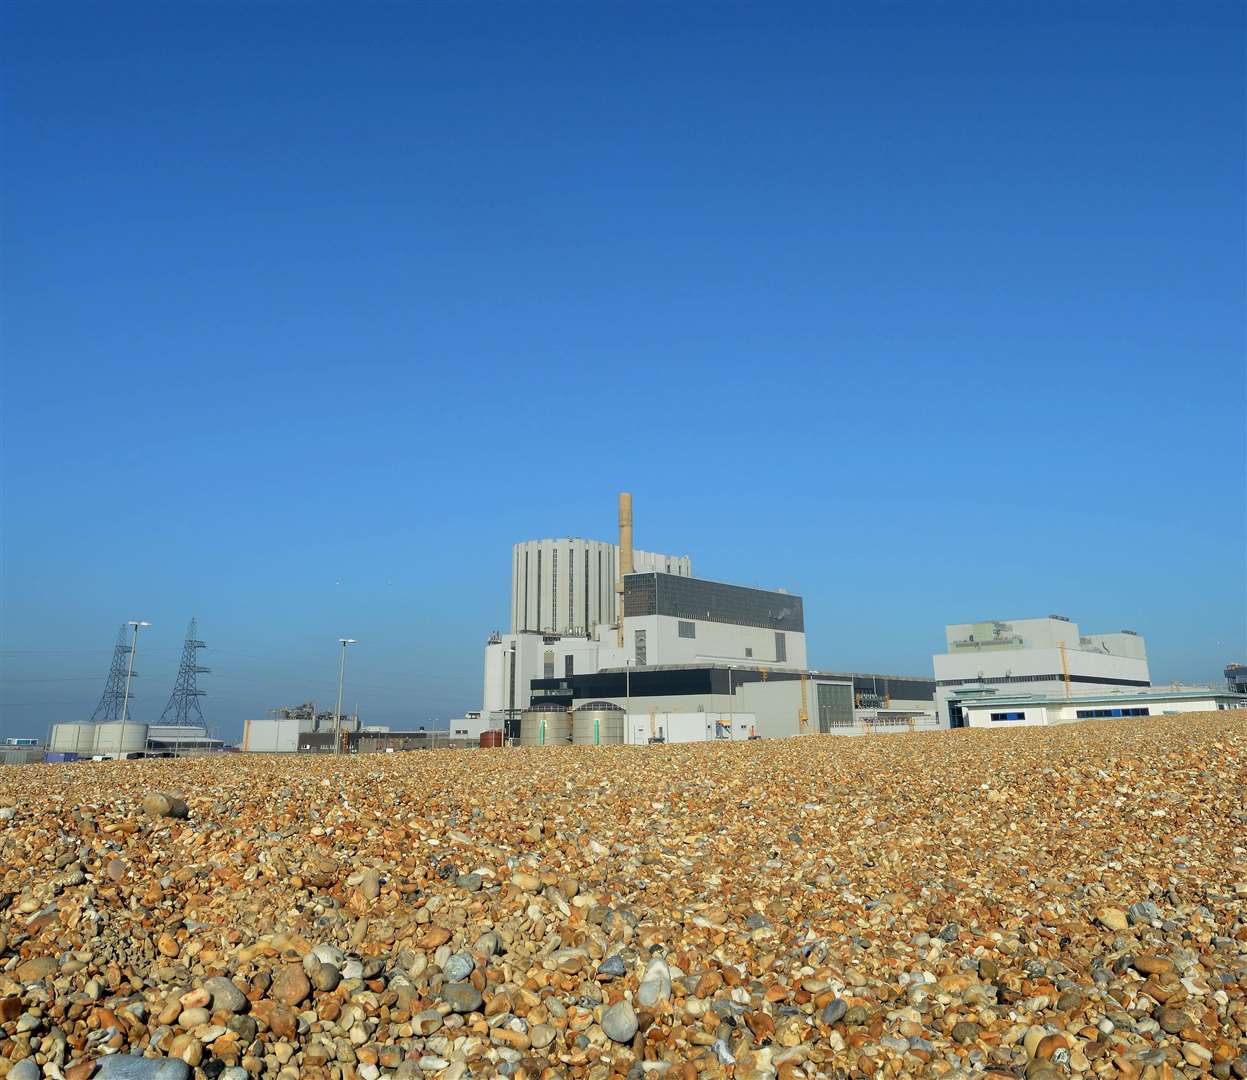 Dungeness B power station employs hundreds of people